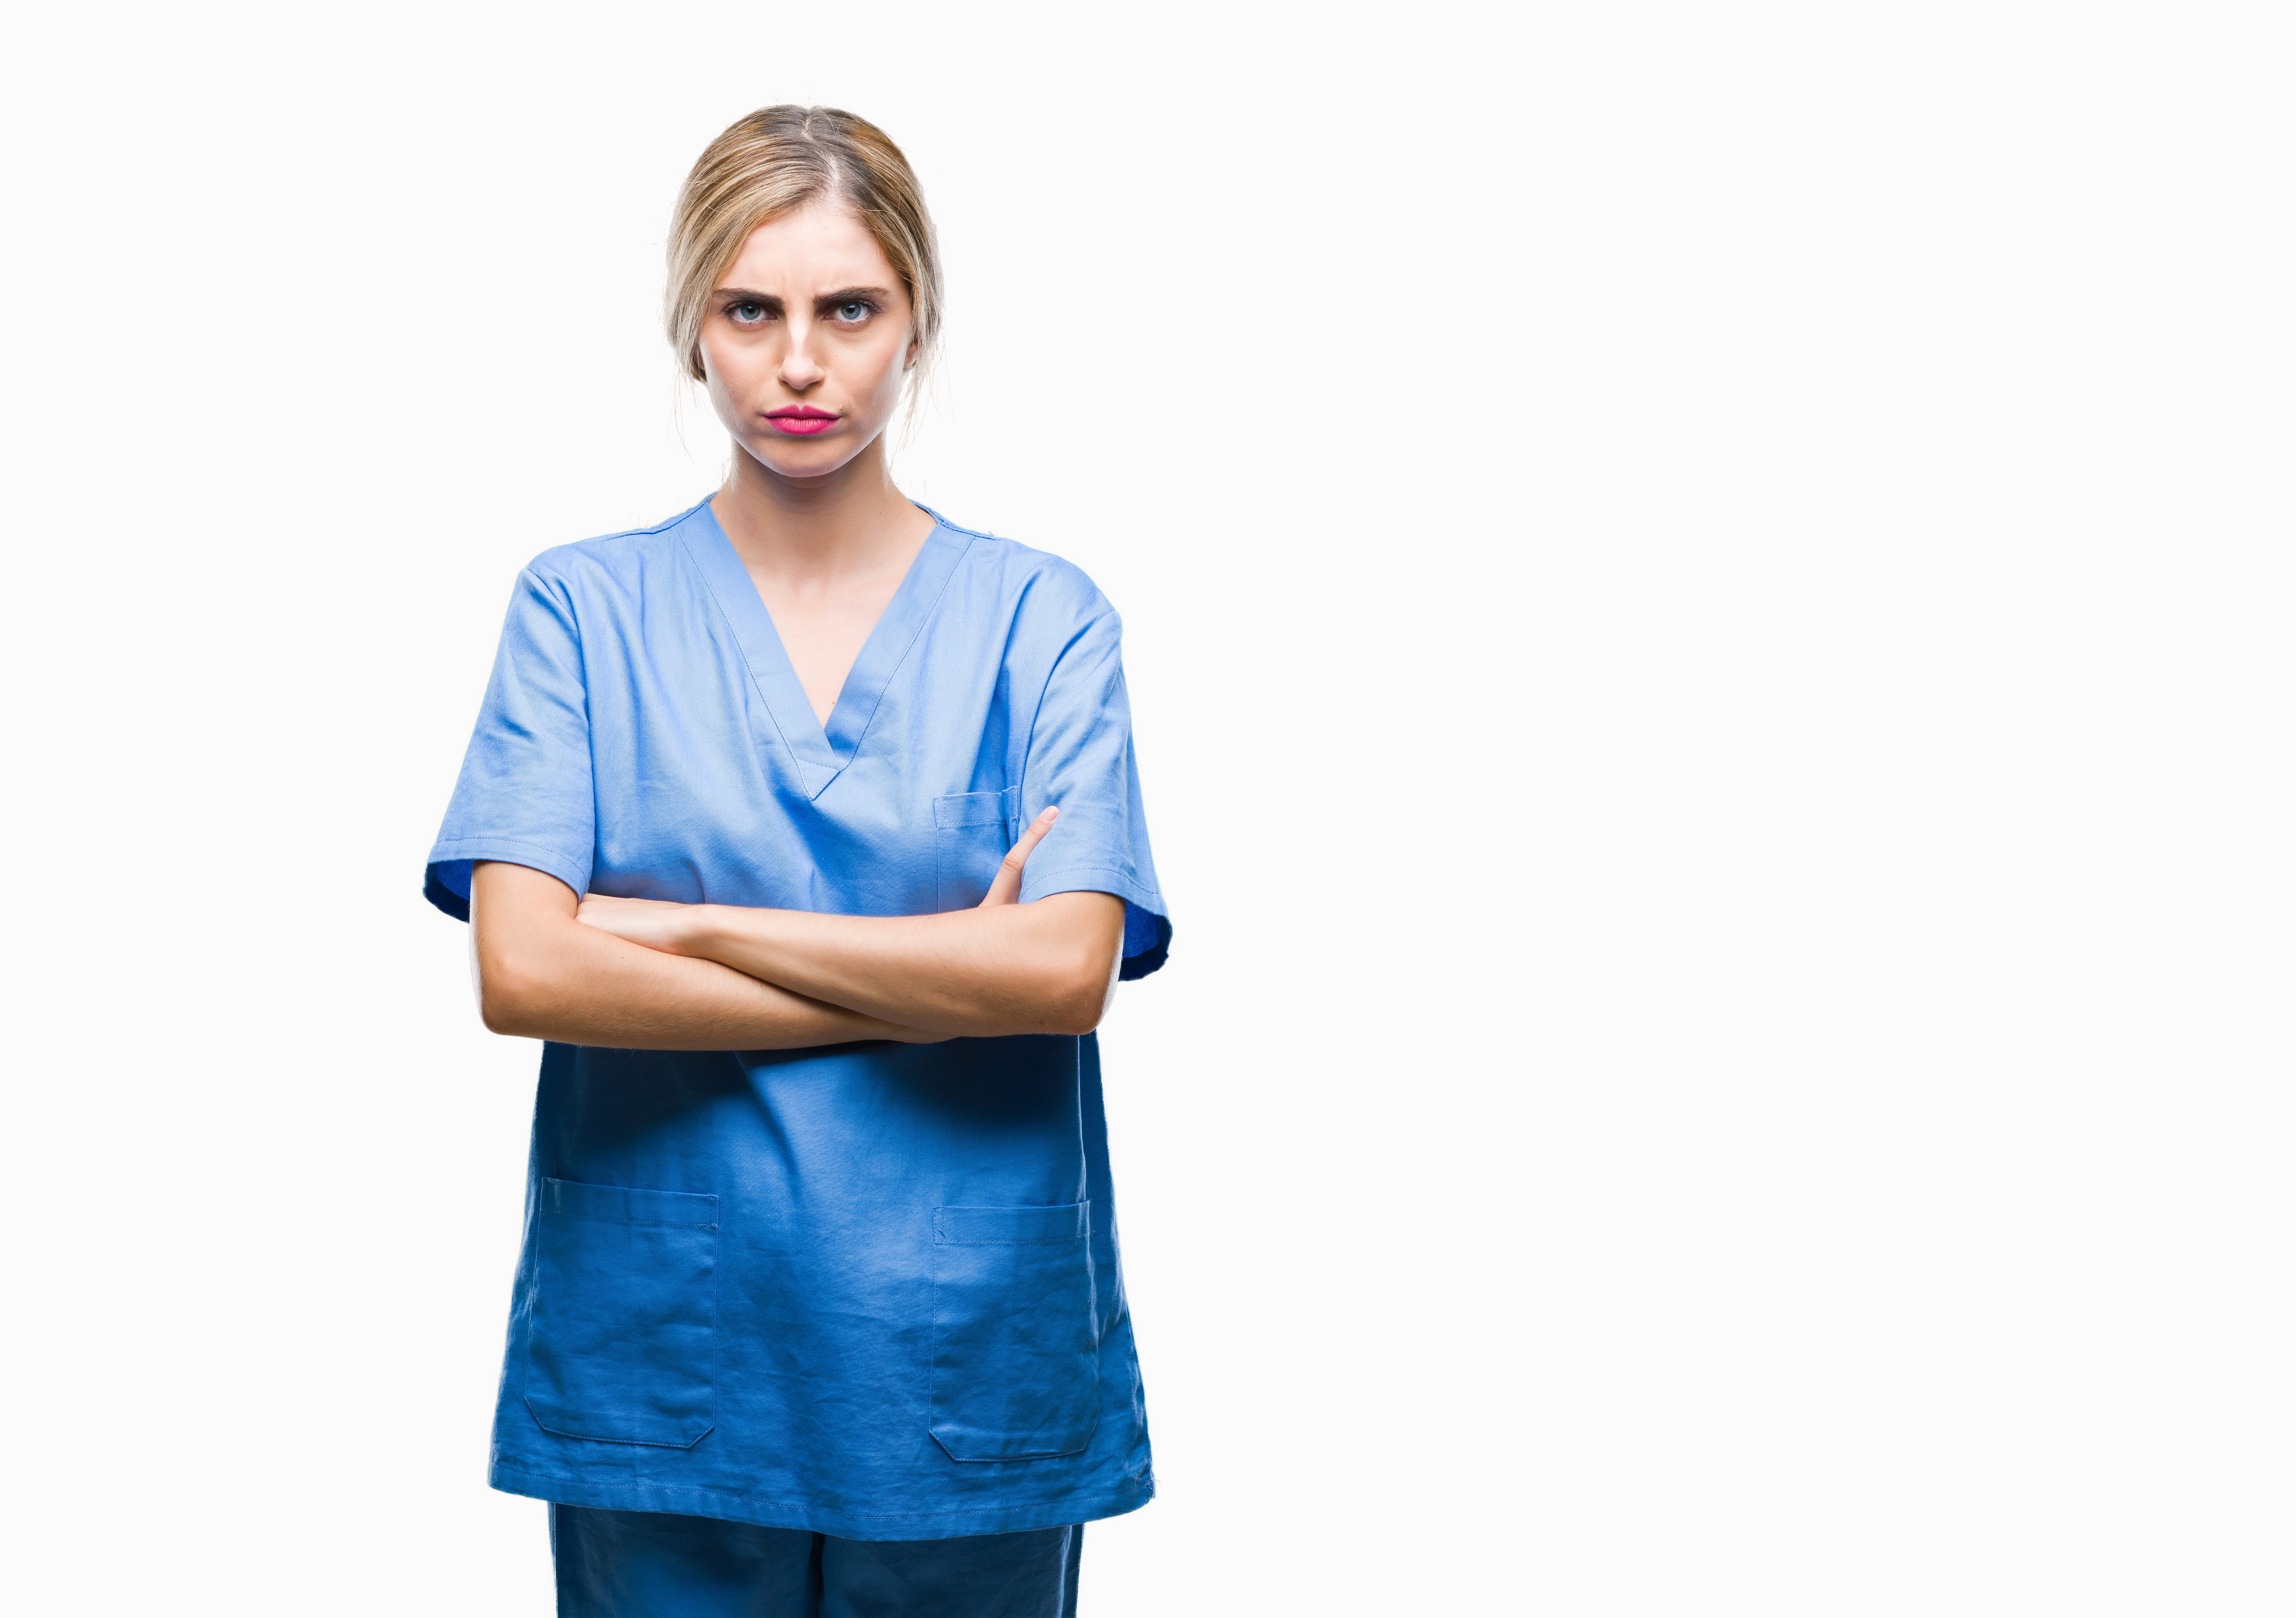 Woman in scrubs with arms crossed in anger | Source: Getty Images